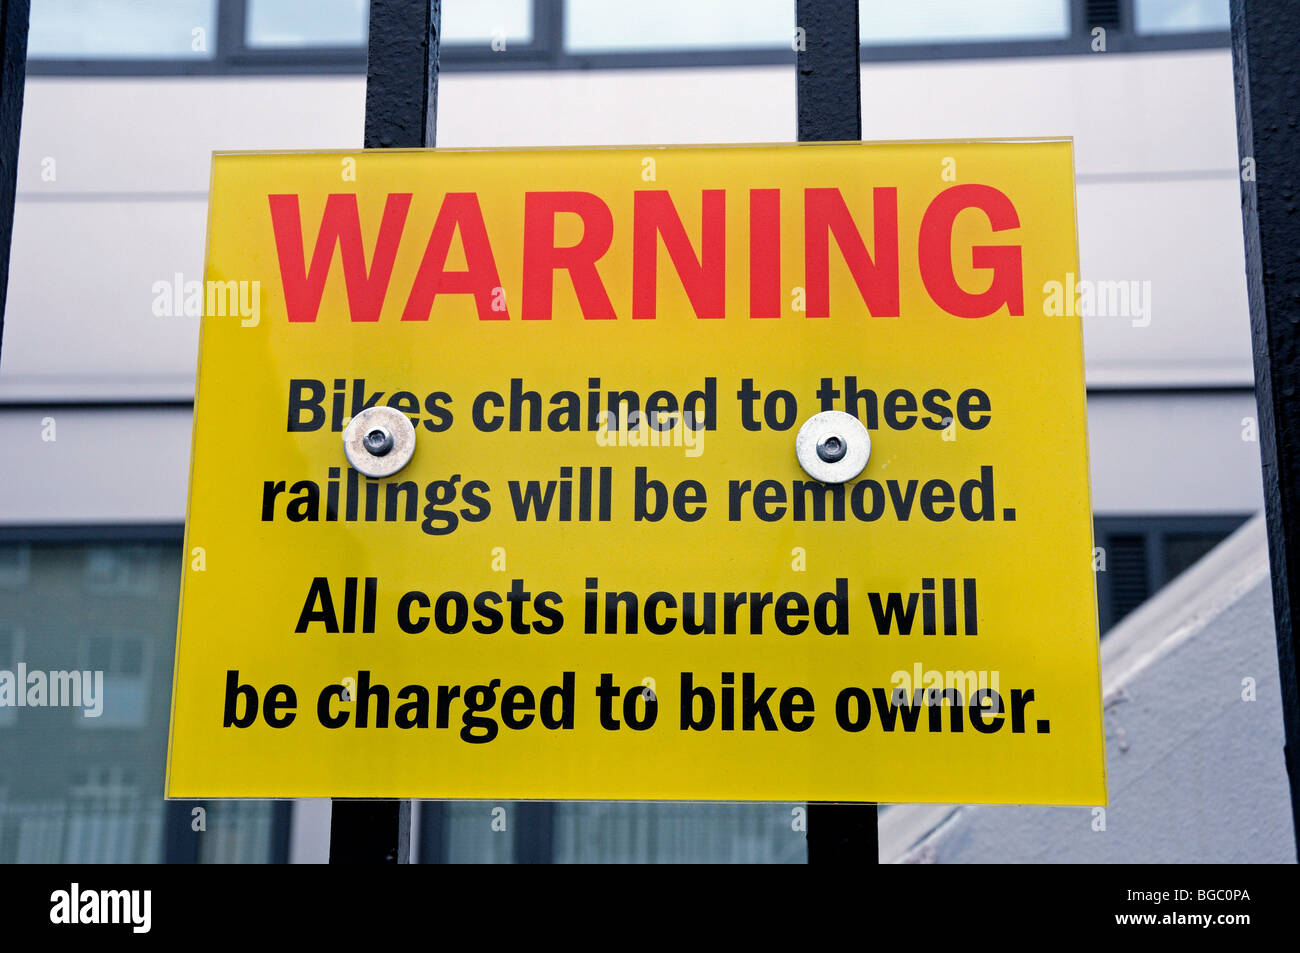 Warning Notice - Bikes chained to these railings will be removed Stock Photo